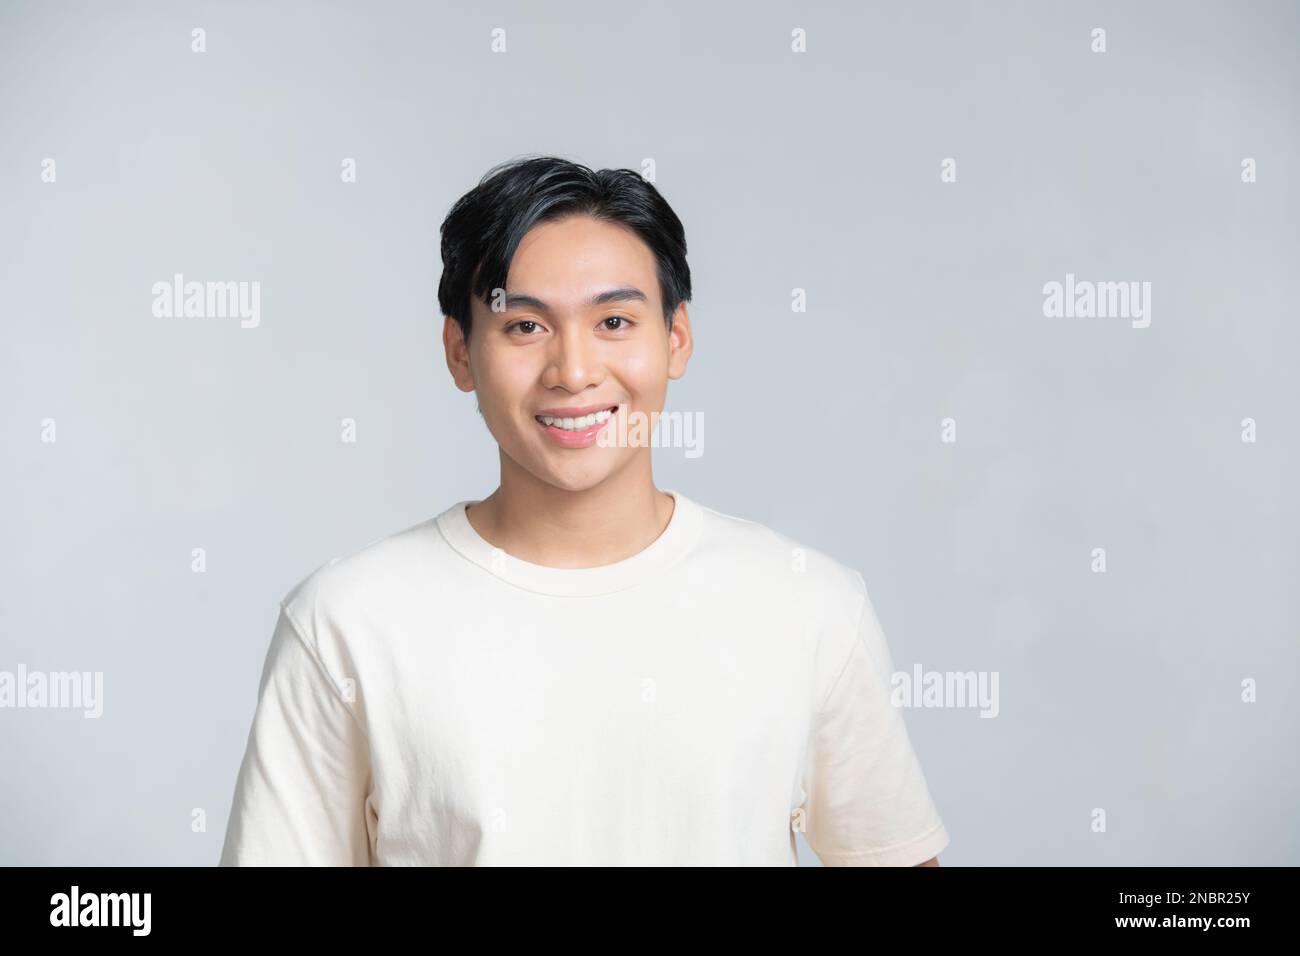 Closeup portrait of asia middle age 20s man wearing white shirt in studio Stock Photo